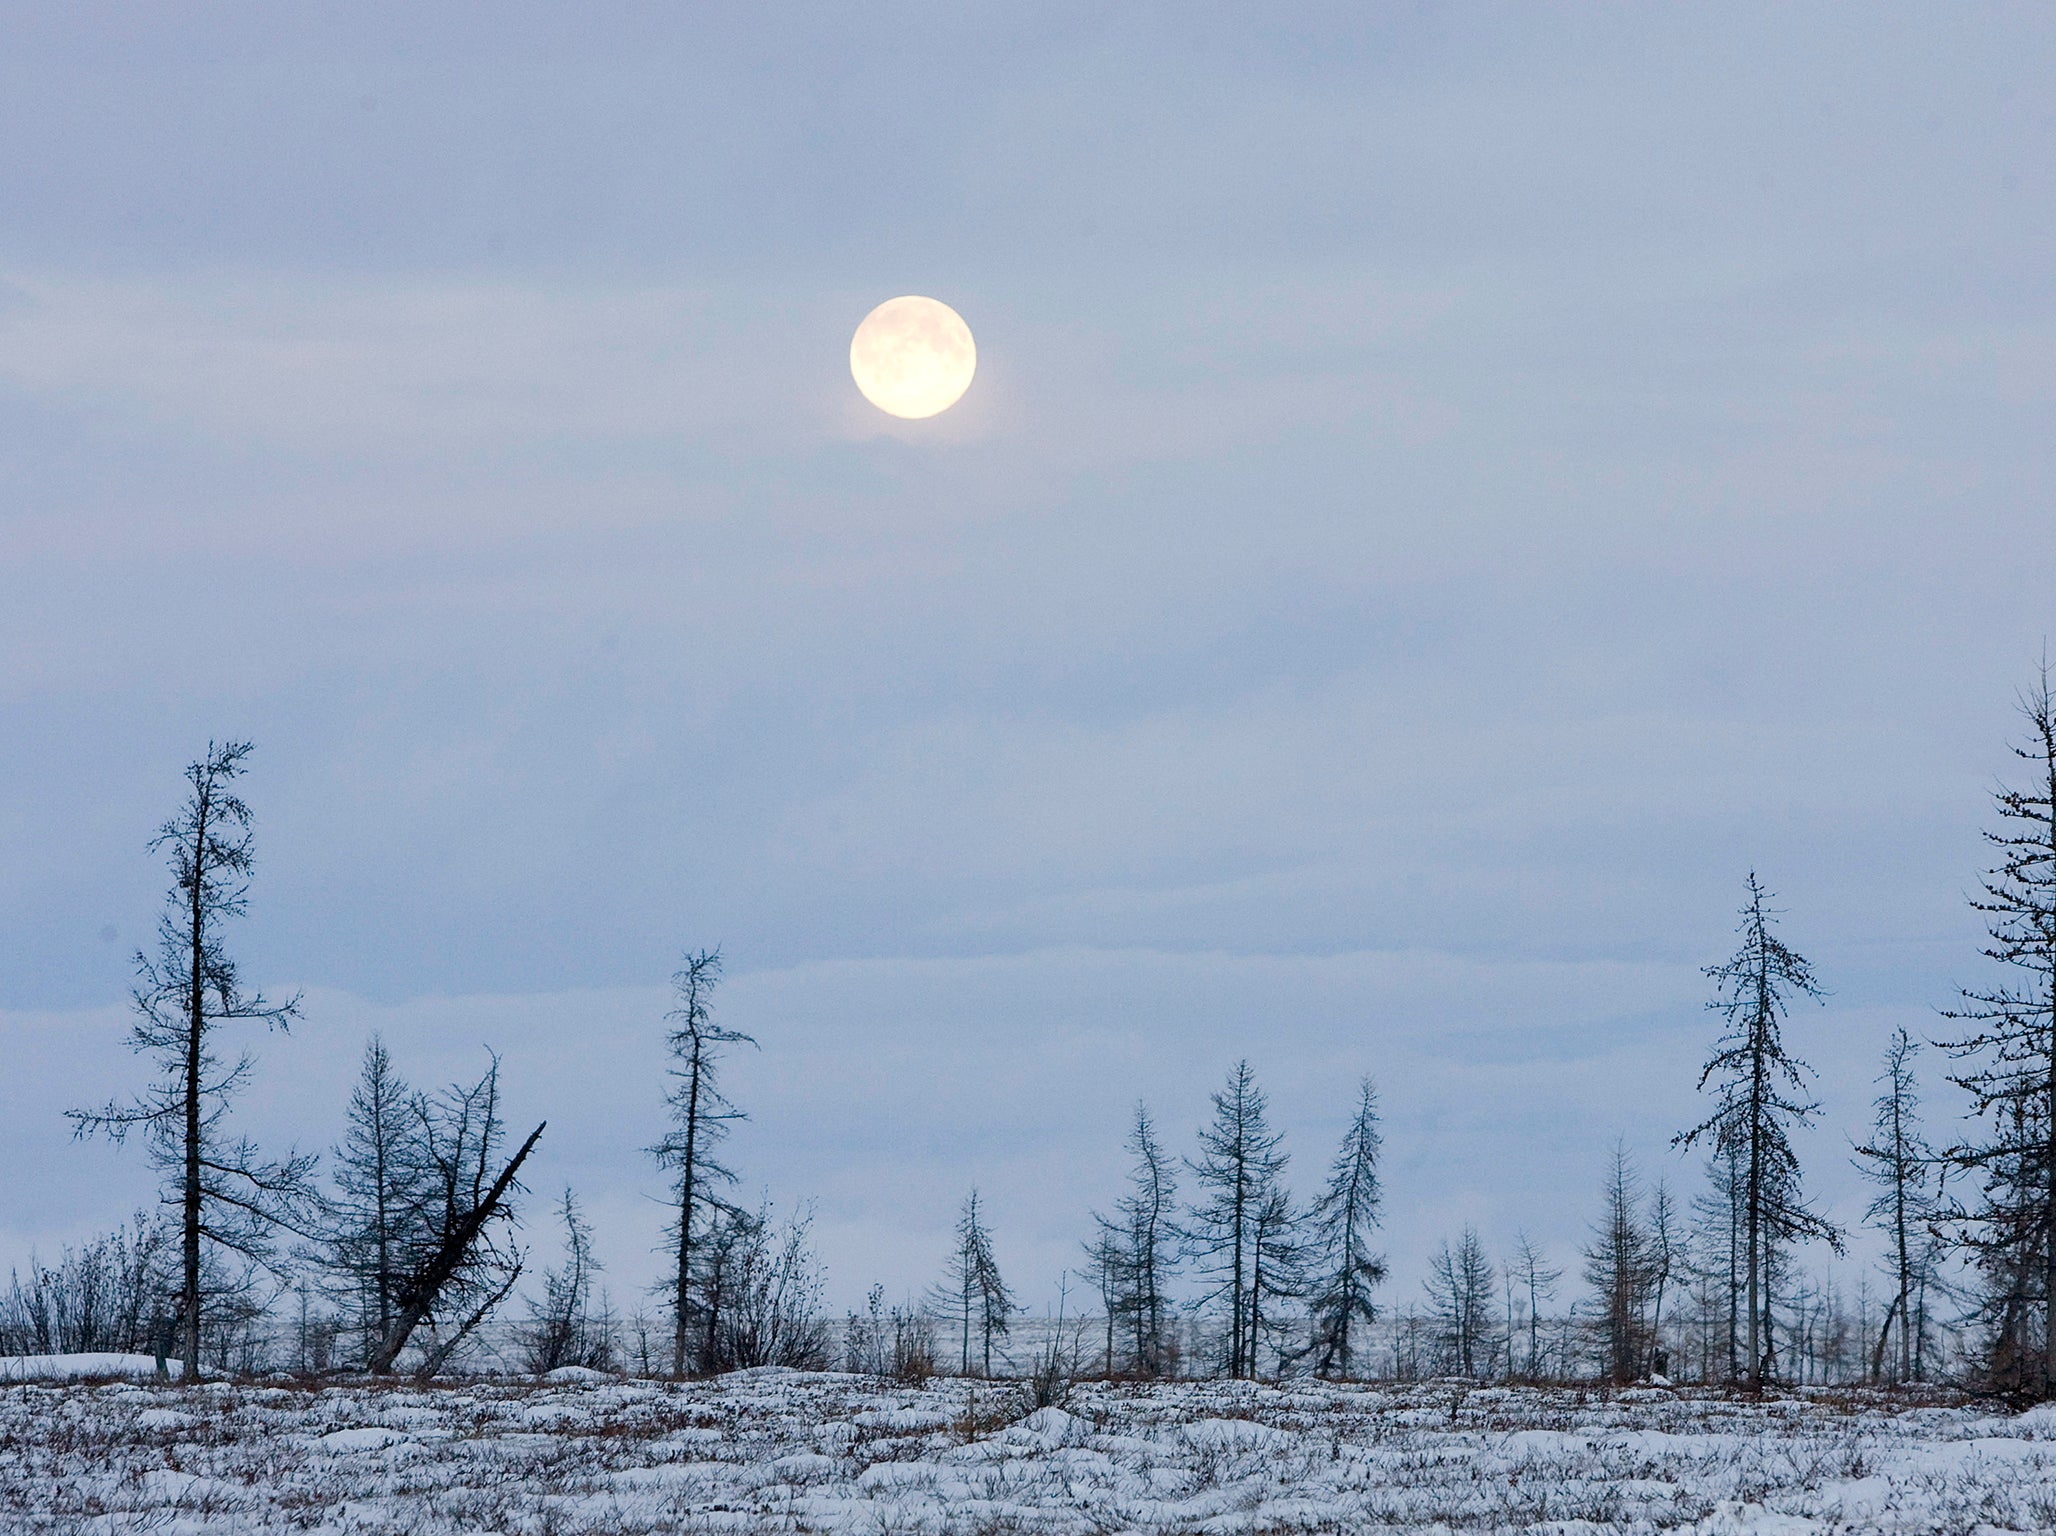 A full moon is seen in Tundra near the river of Khanemi, located in the Yamal peninsula above the polar circle